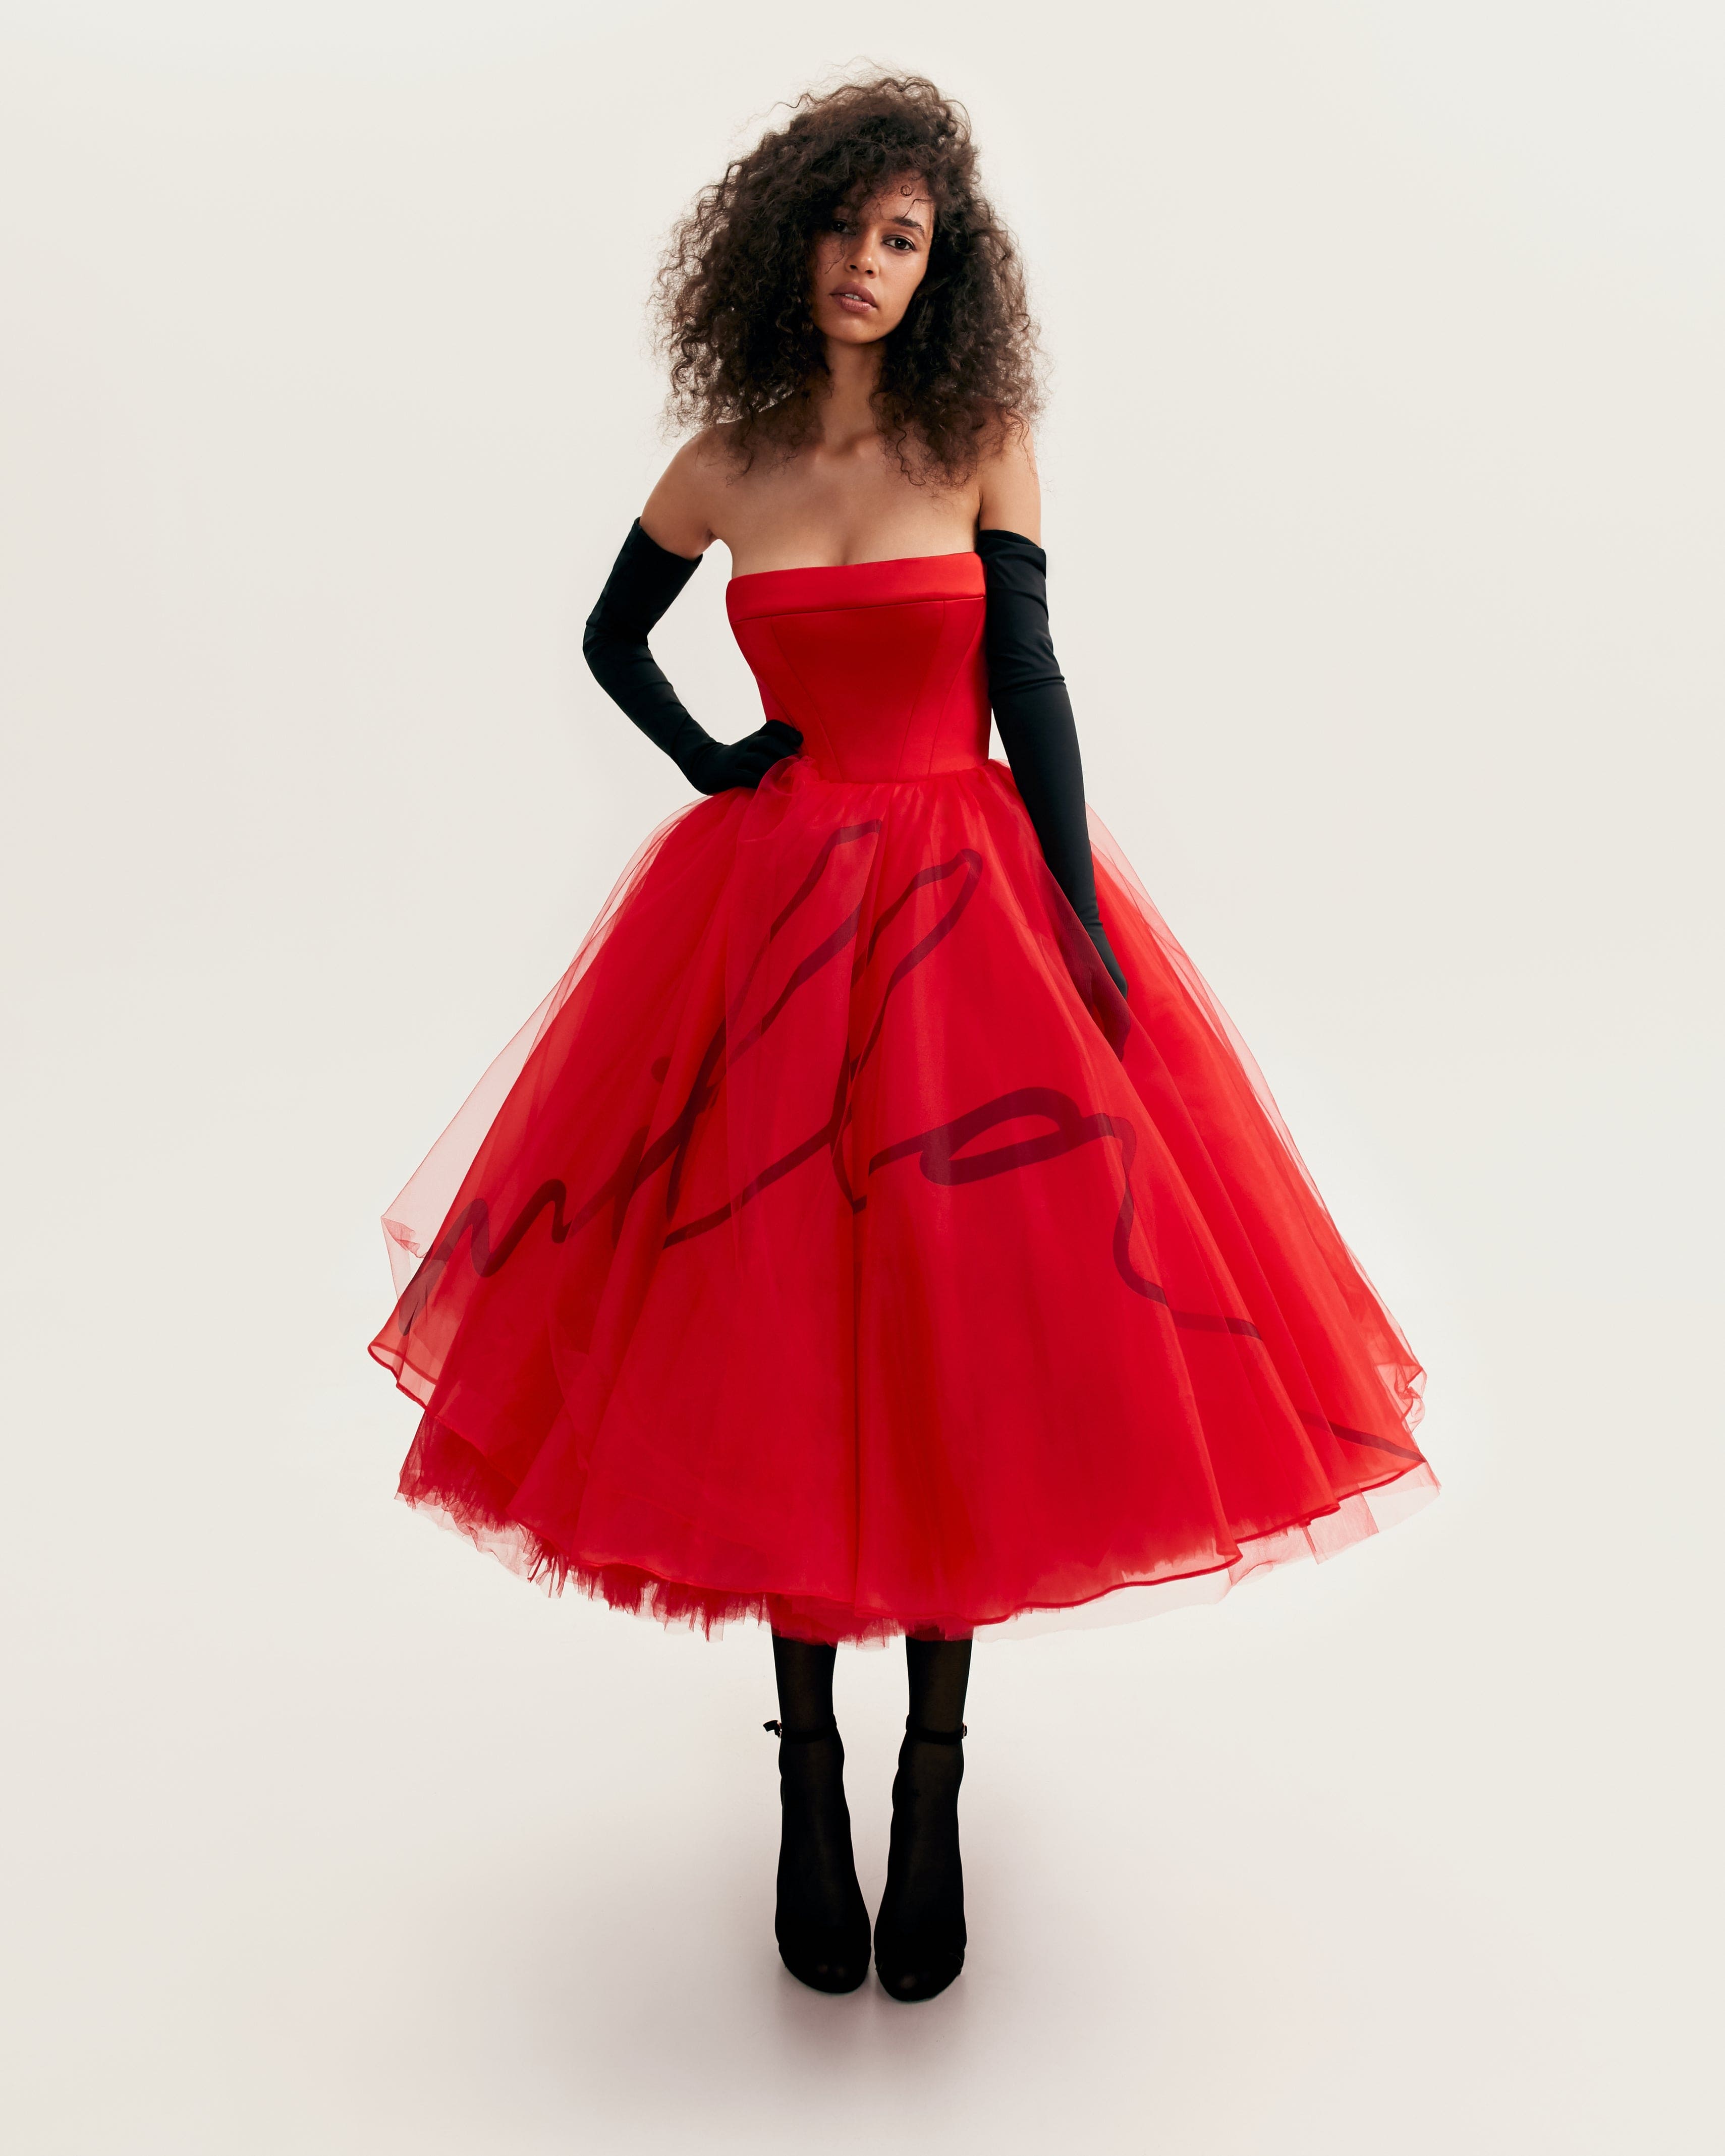 Dramatic red organza dress adorned with Milla's signature and black gloves, Xo Xo